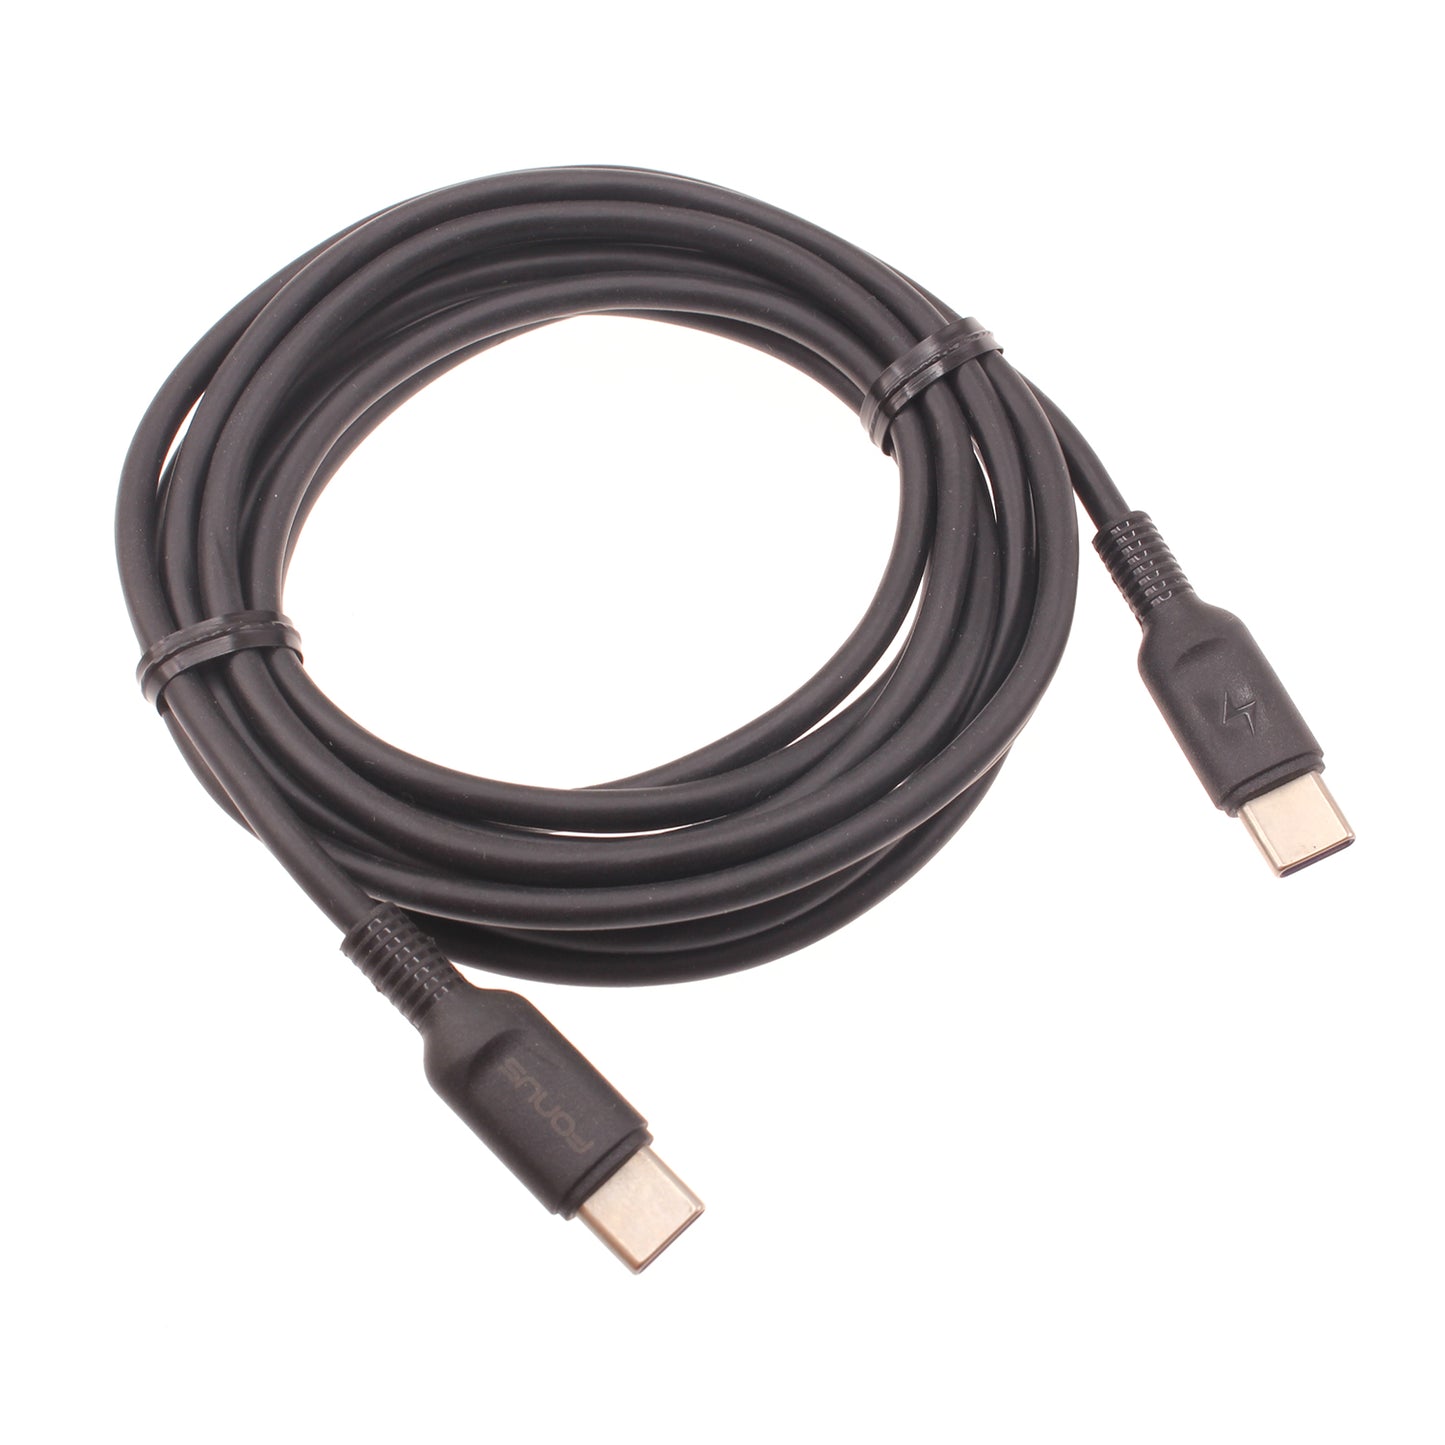 6ft Long USB-C Cable, Chord Wire Power PD Fast Charger Cord - NWJ68